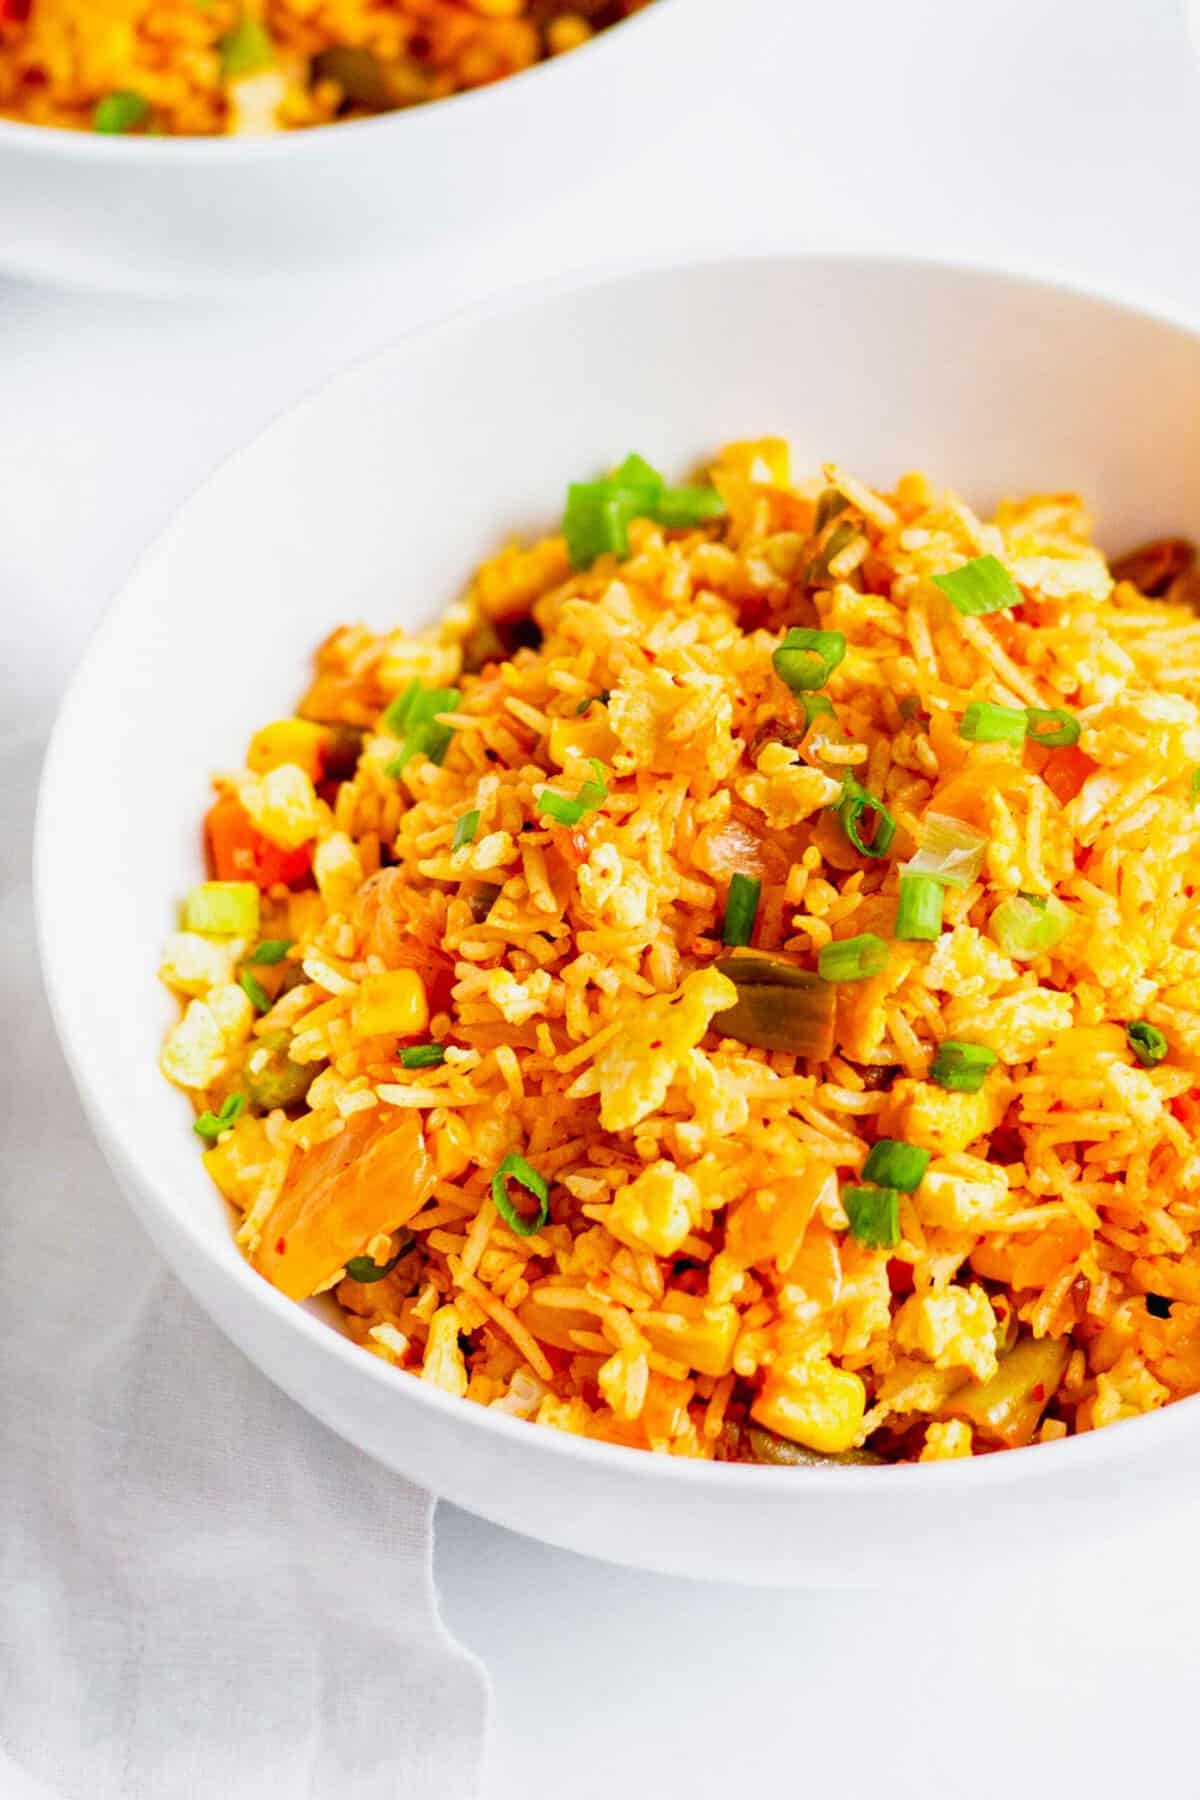 Kimchi fried rice in white bowl, garnished with green onions